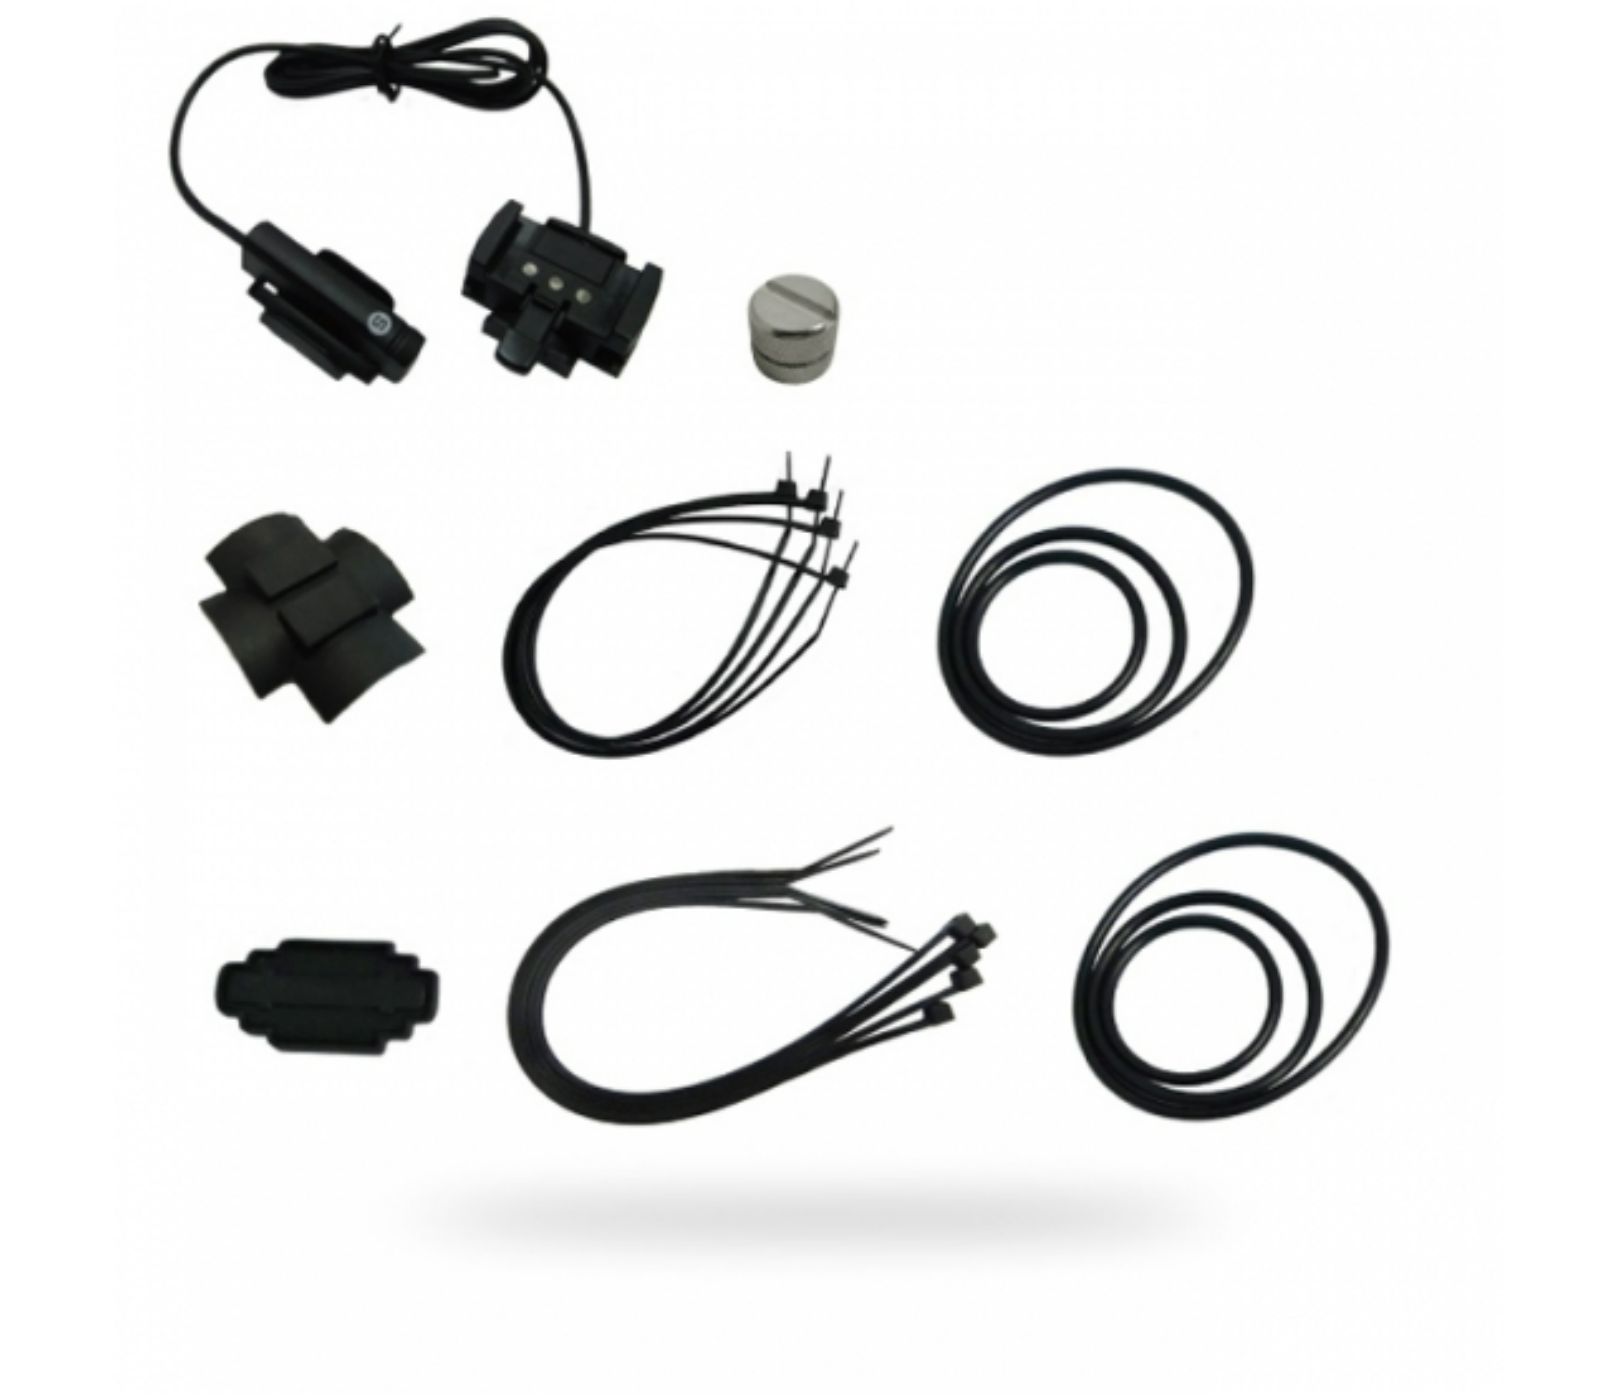 Echowell Wired Kit (ACC-10)